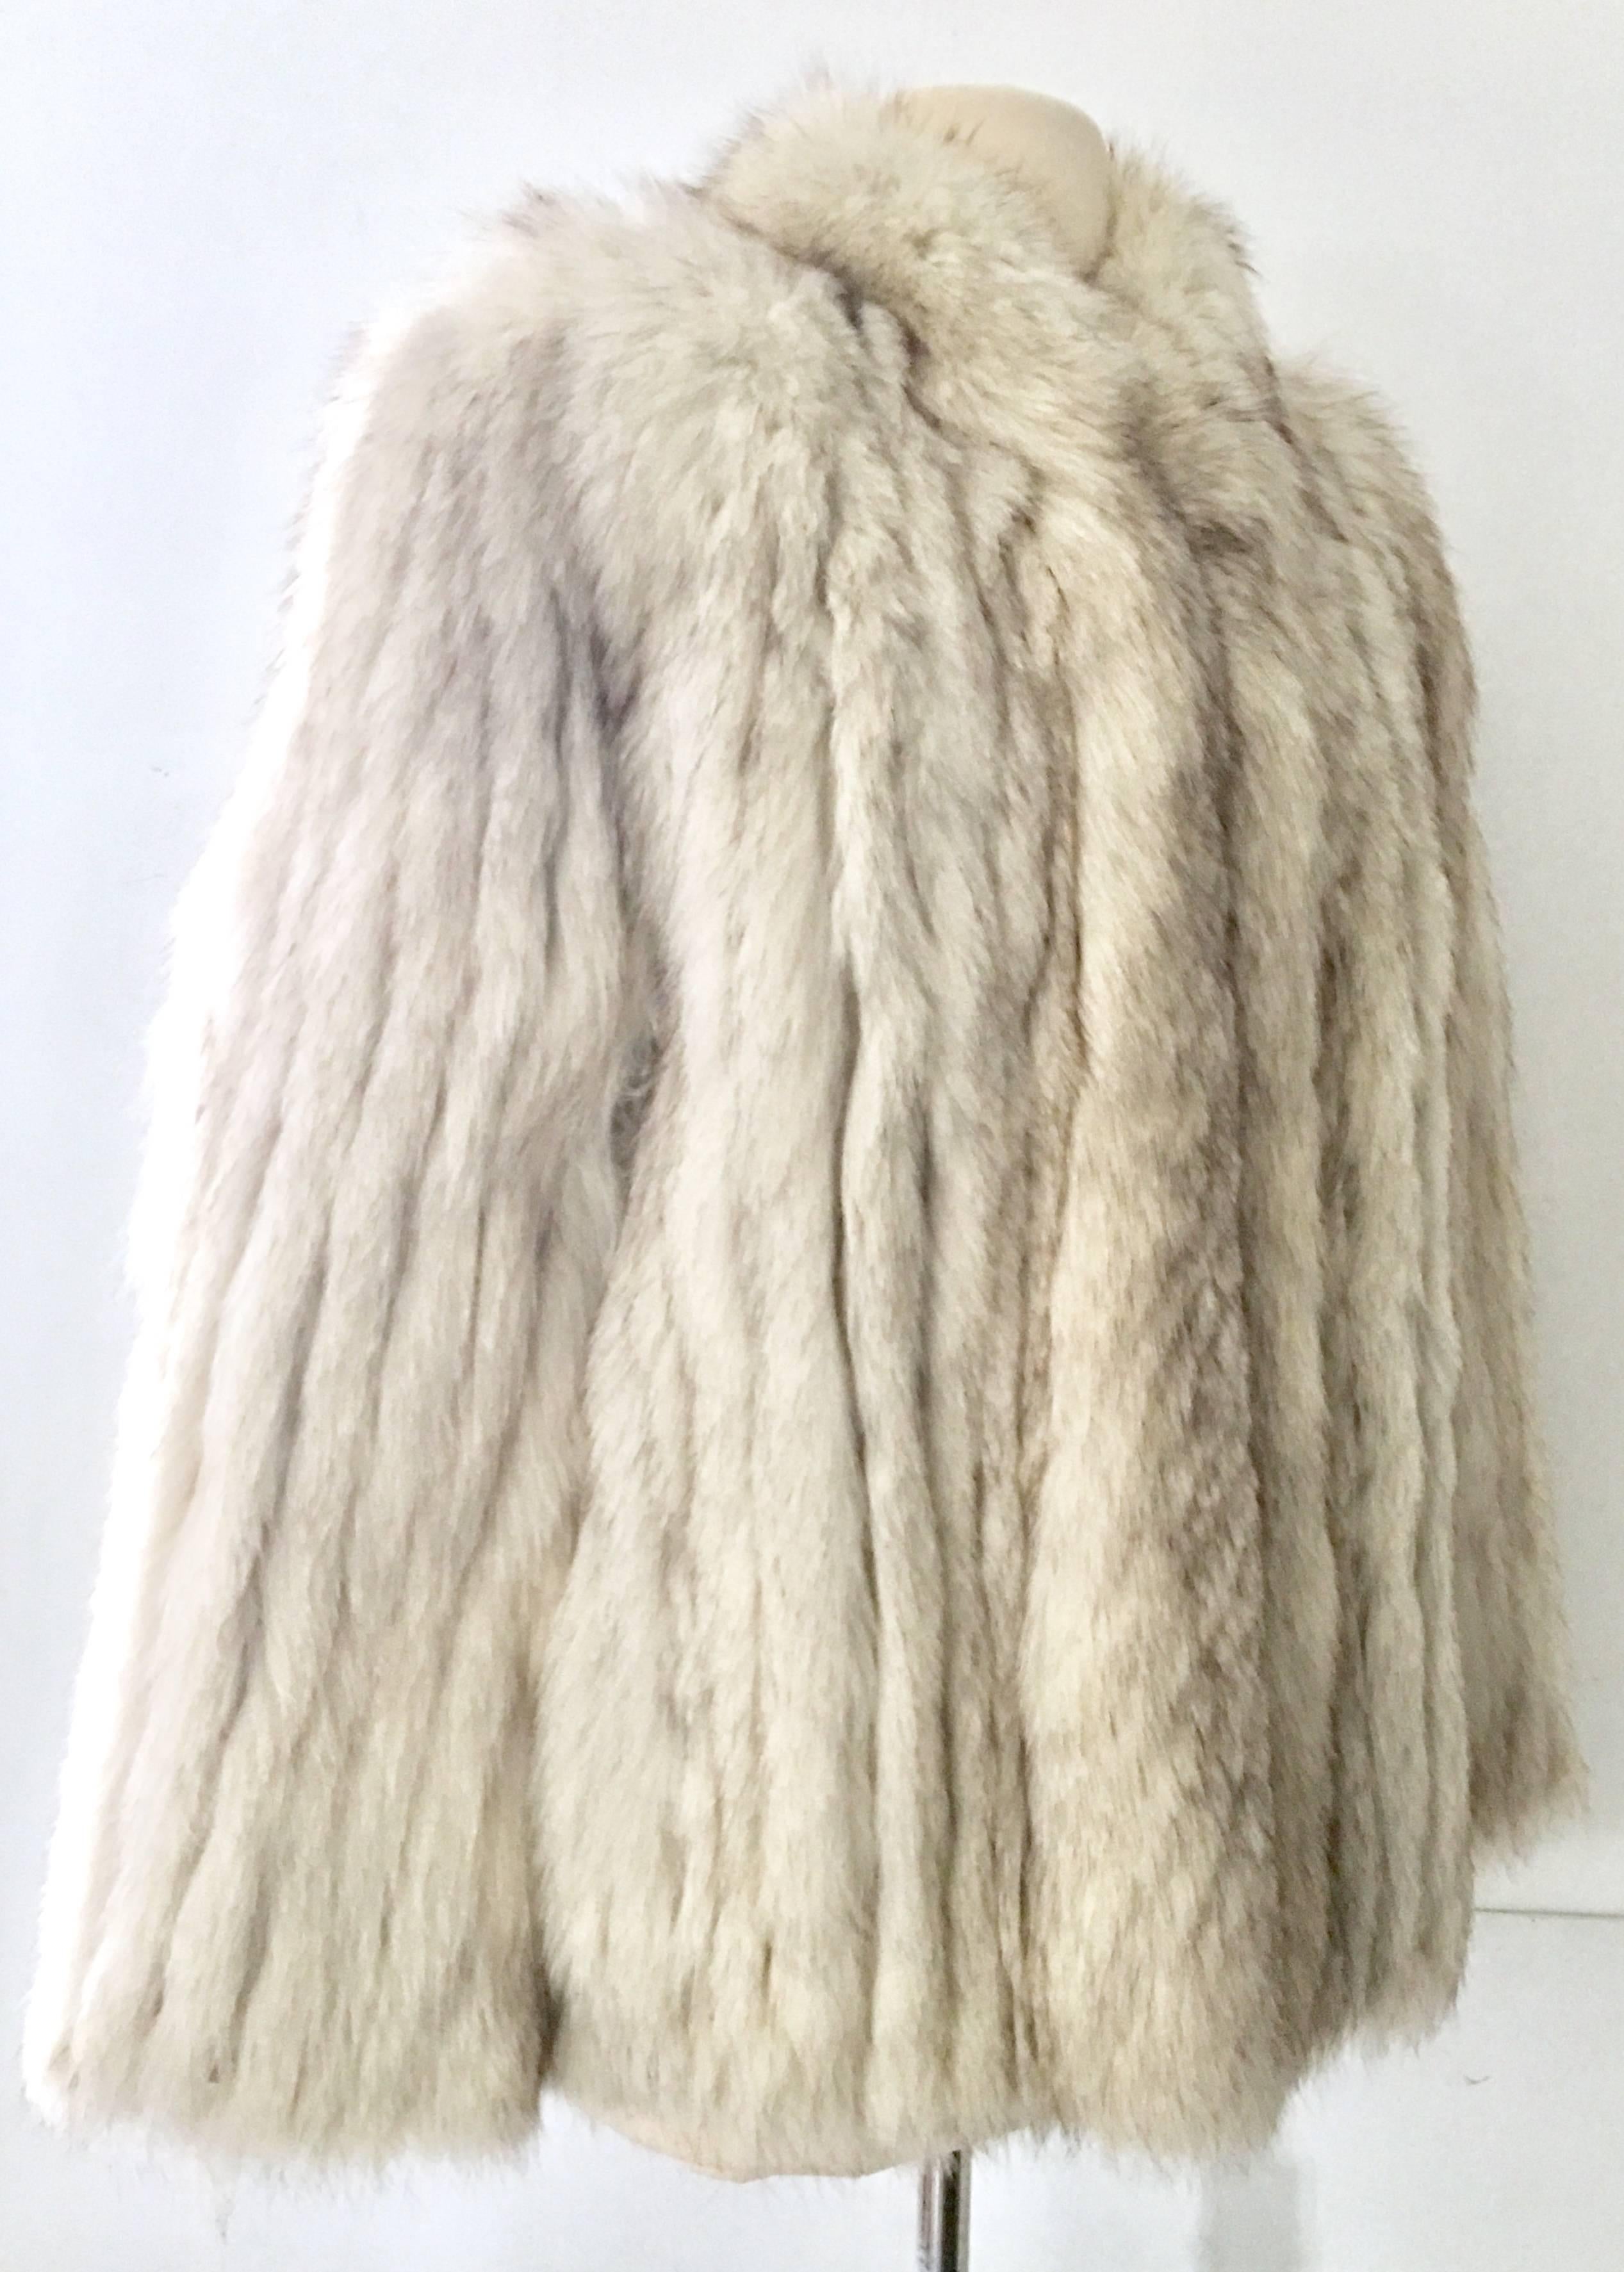 Vintage Winter White Silver Fox Jacket. This pristine jacket features, two side pockets and four invisible front closure hooks. Fully lined in silver satin with the original furrier tag in tact, Saga Fox-Size Medium.